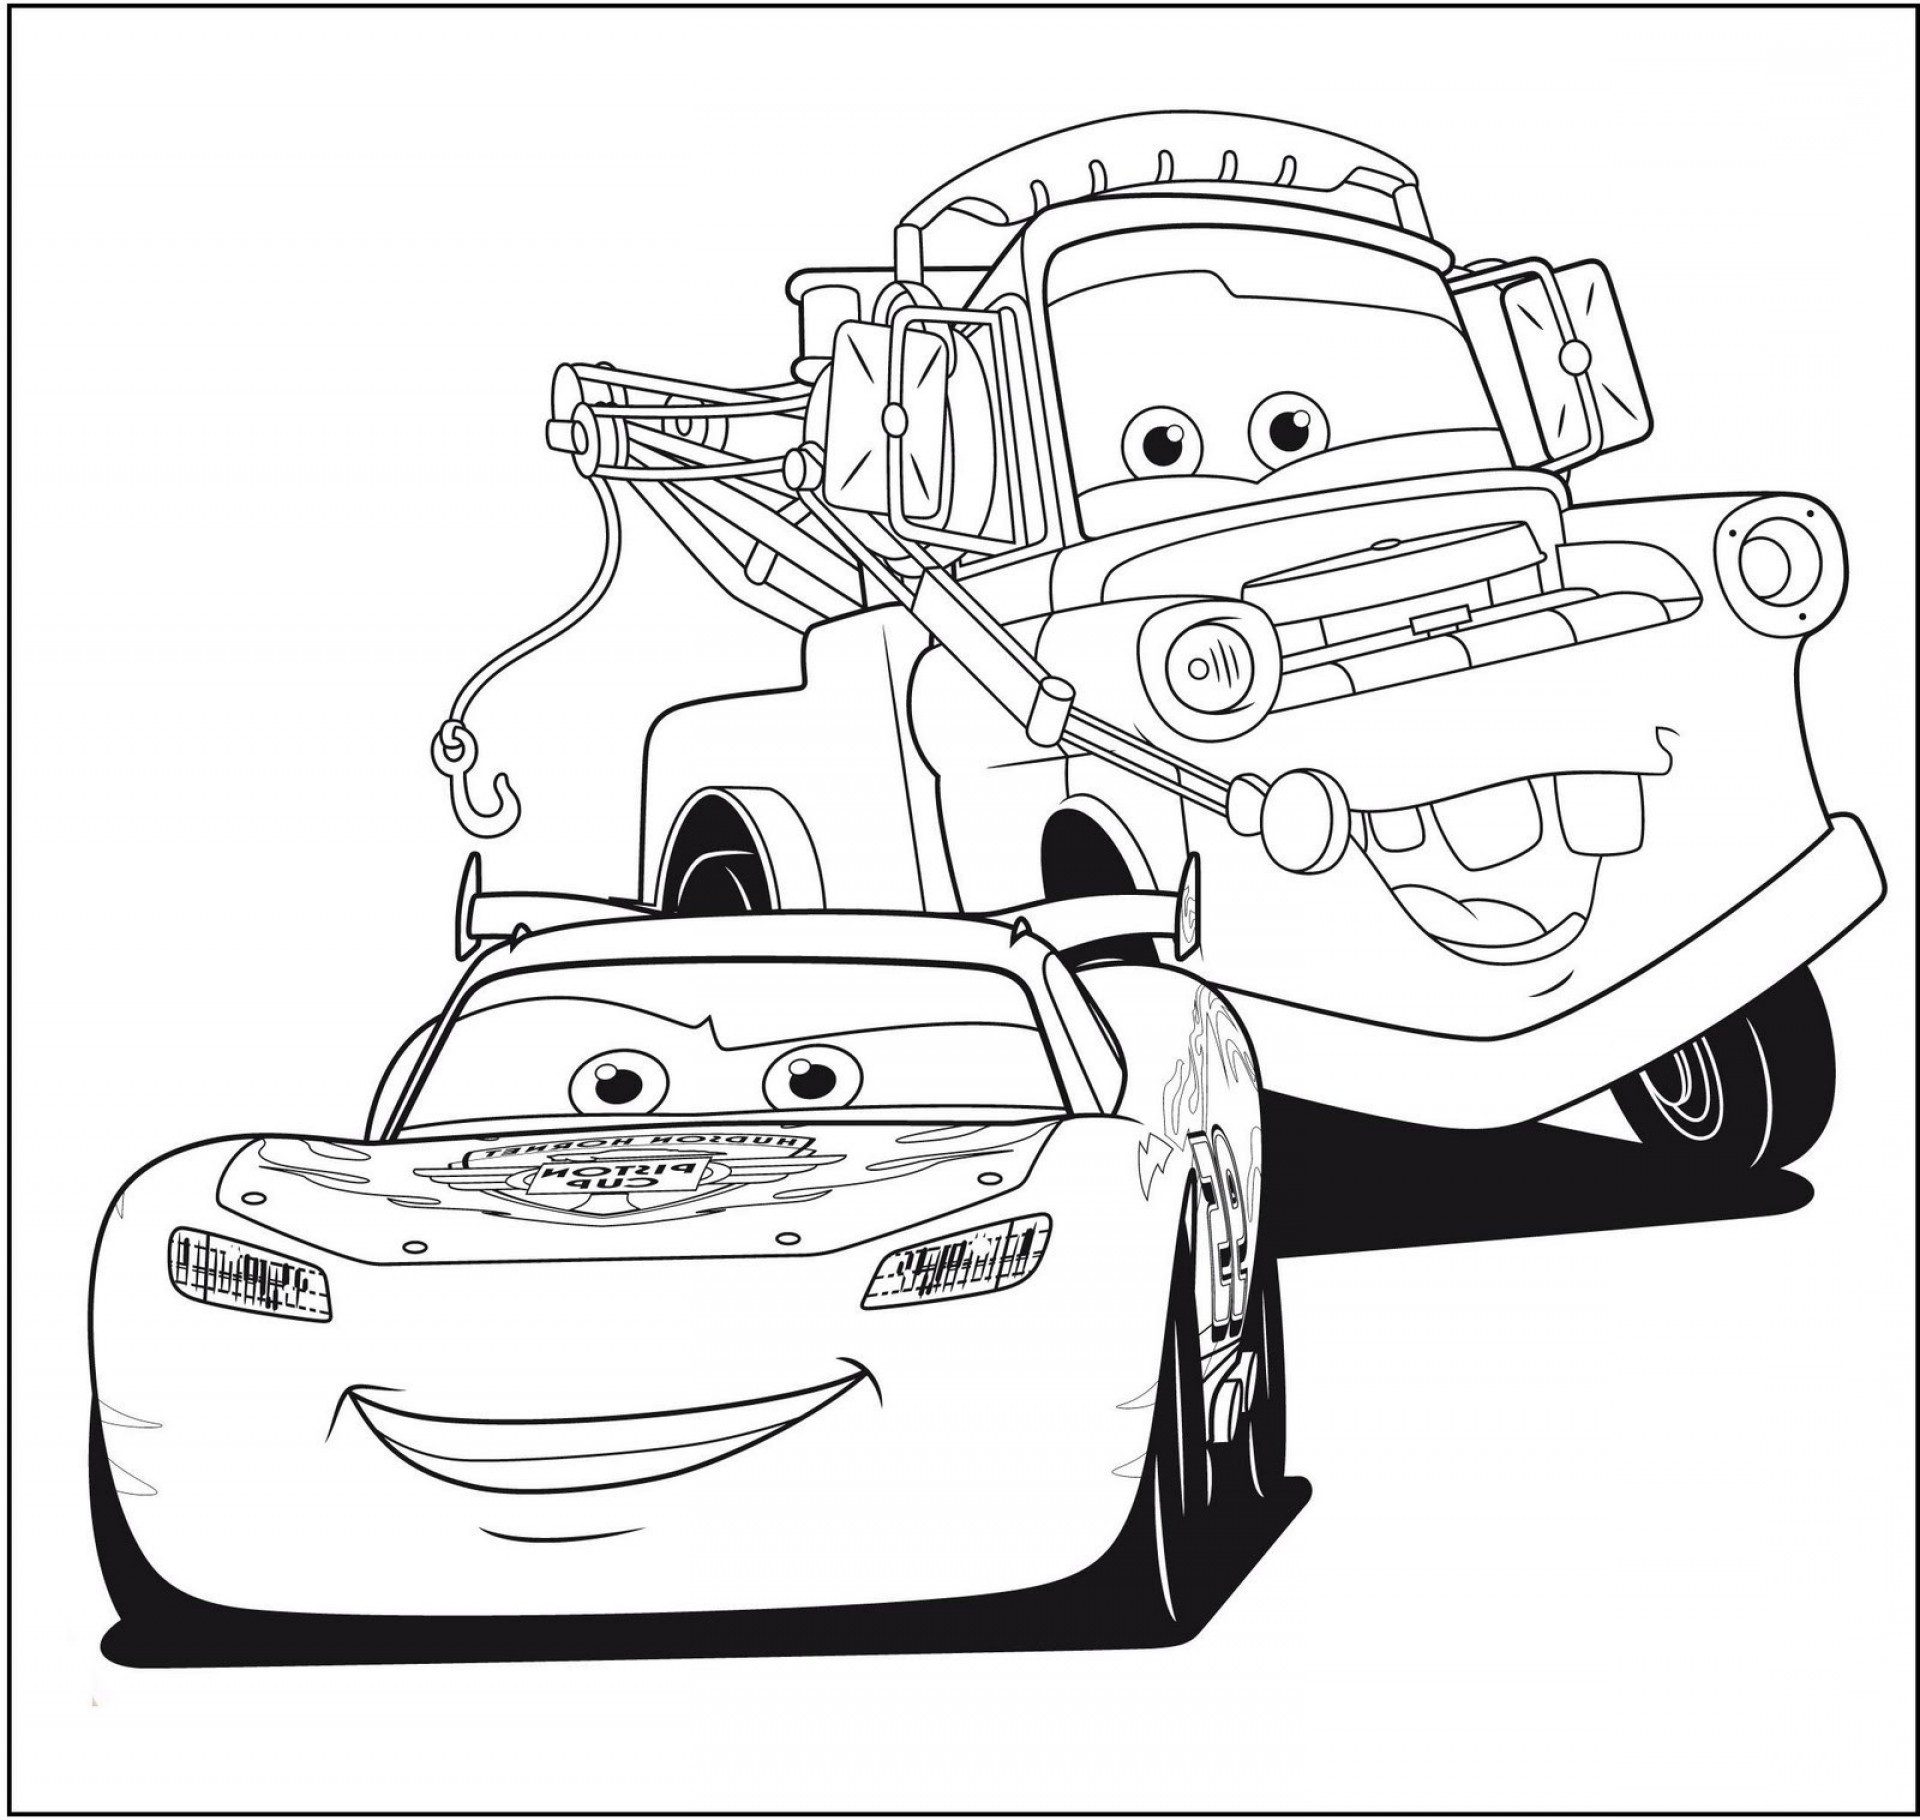 Coloring Pages : Coloring Book Disney Cars New Excelent Mac ...